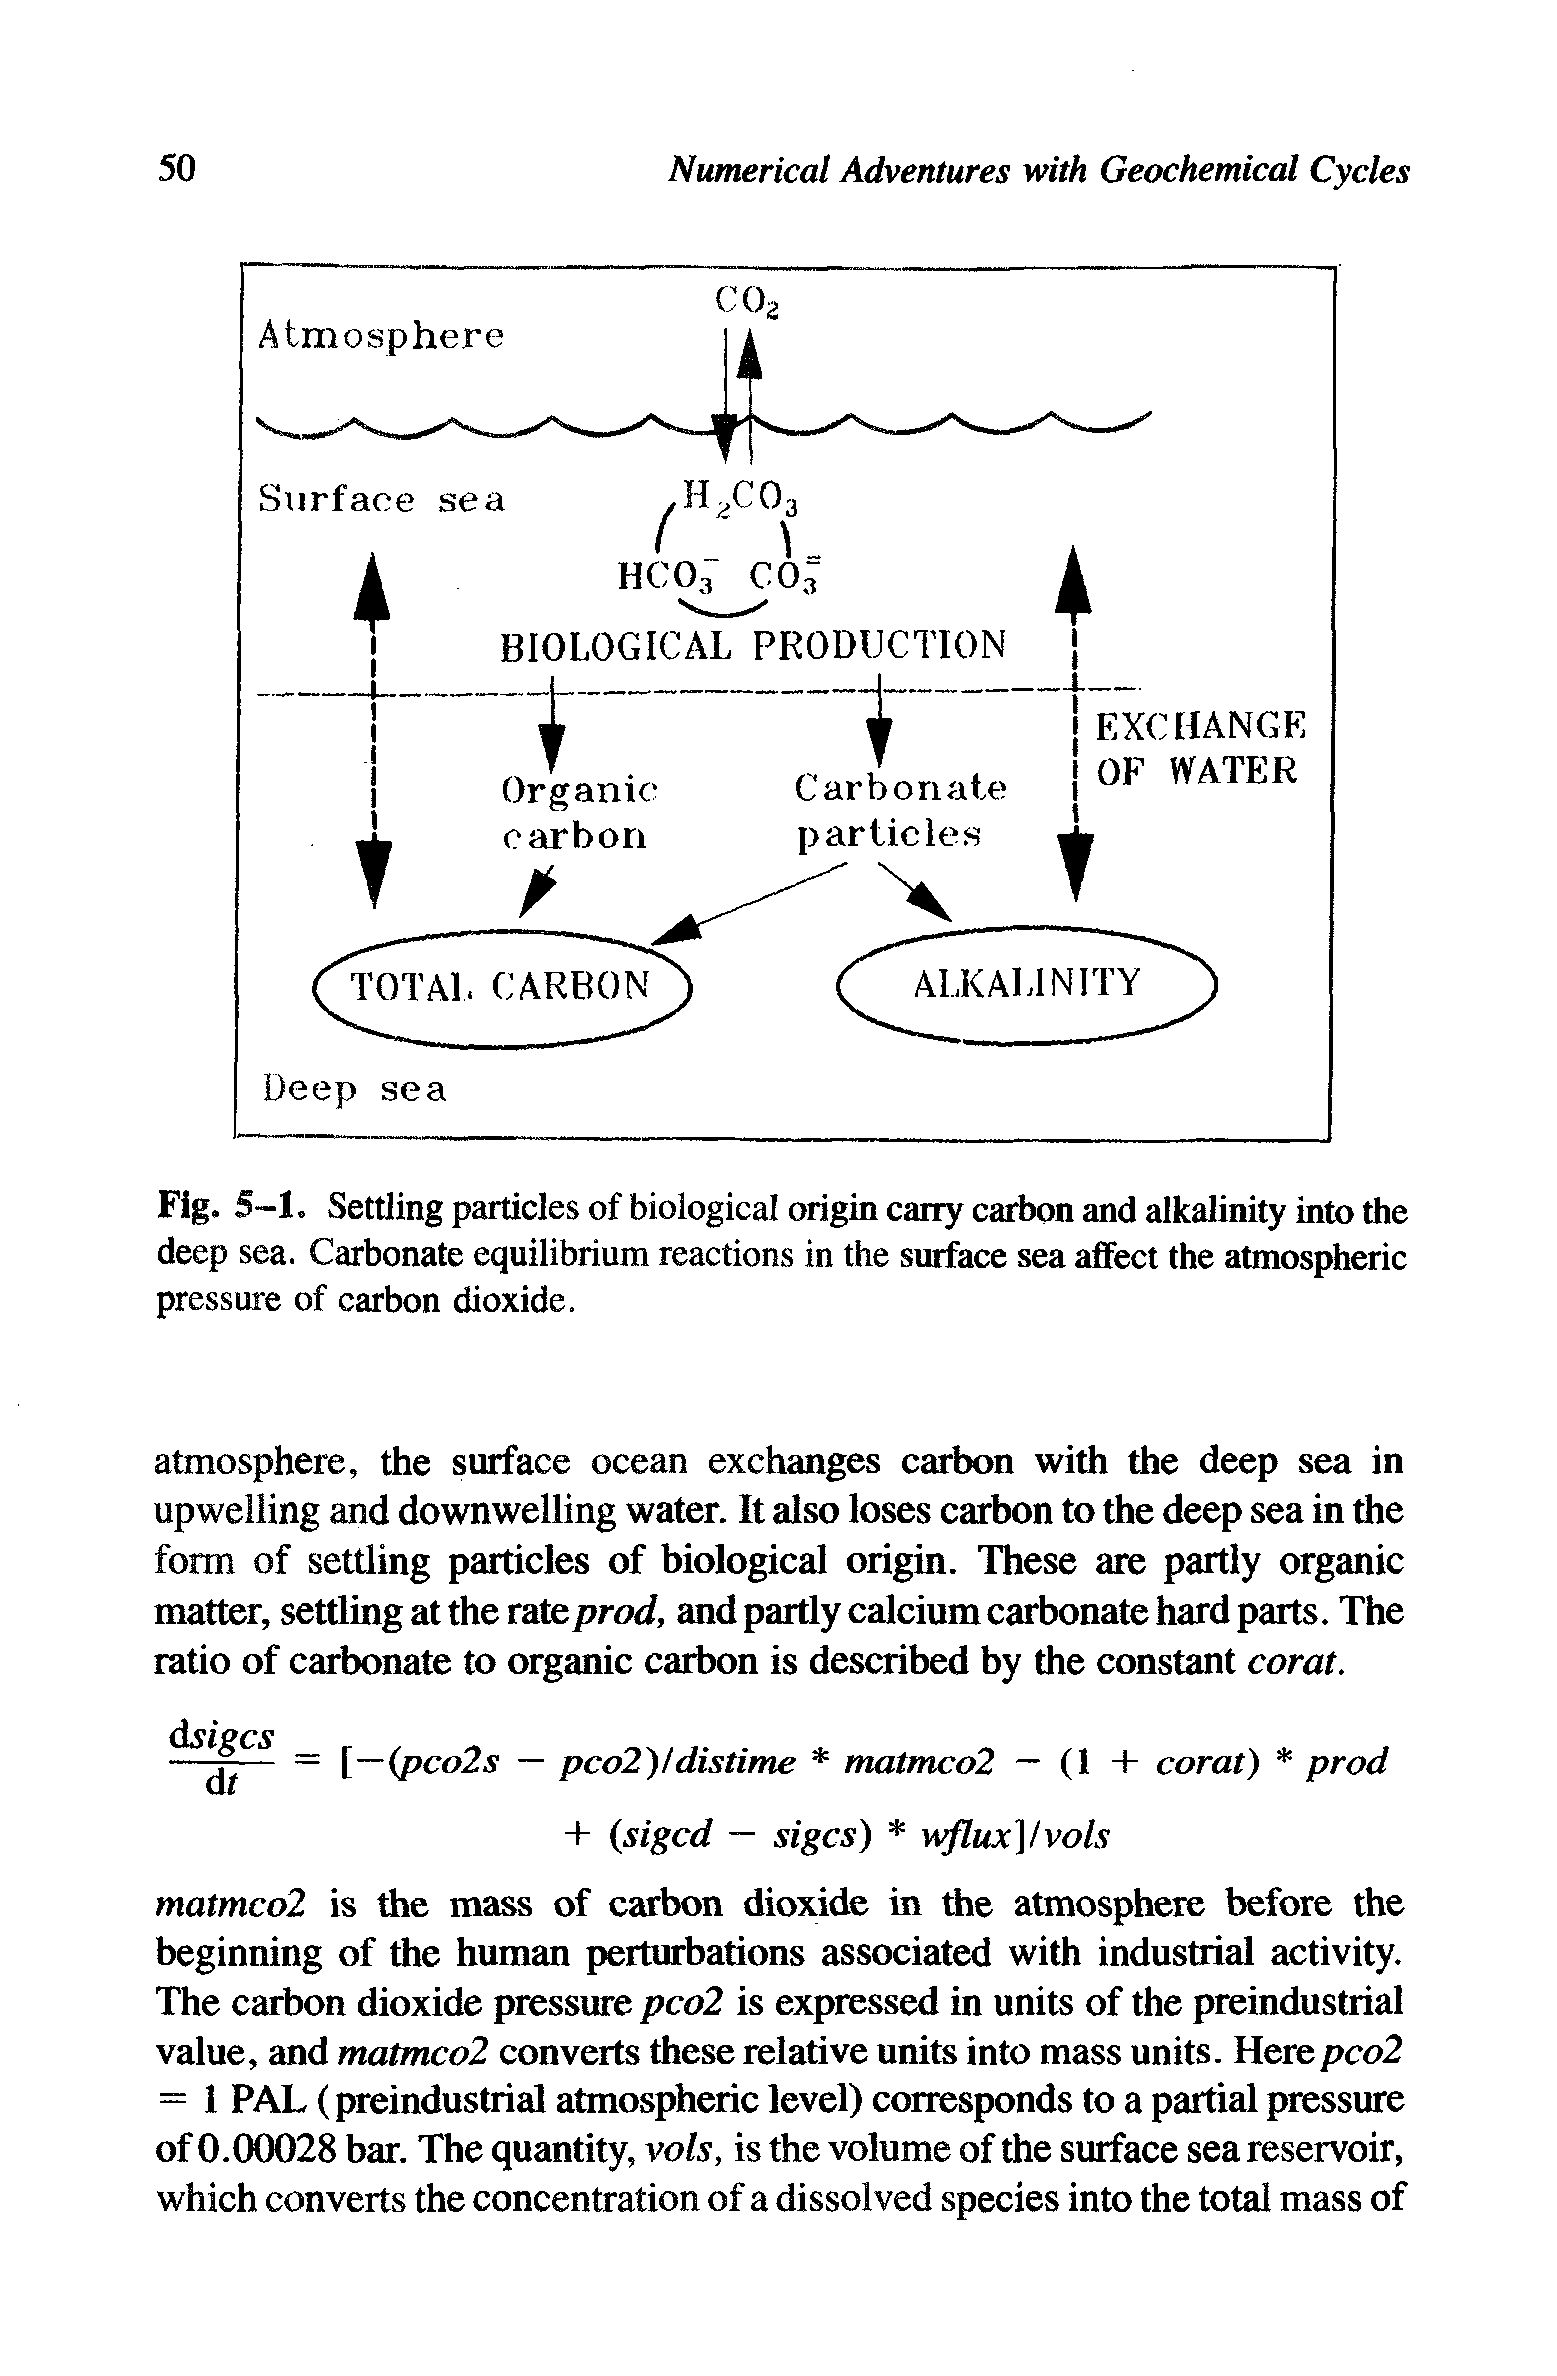 Fig. 5-1. Settling particles of biological origin carry carbon and alkalinity into the deep sea. Carbonate equilibrium reactions in the surface sea affect the atmospheric pressure of carbon dioxide.